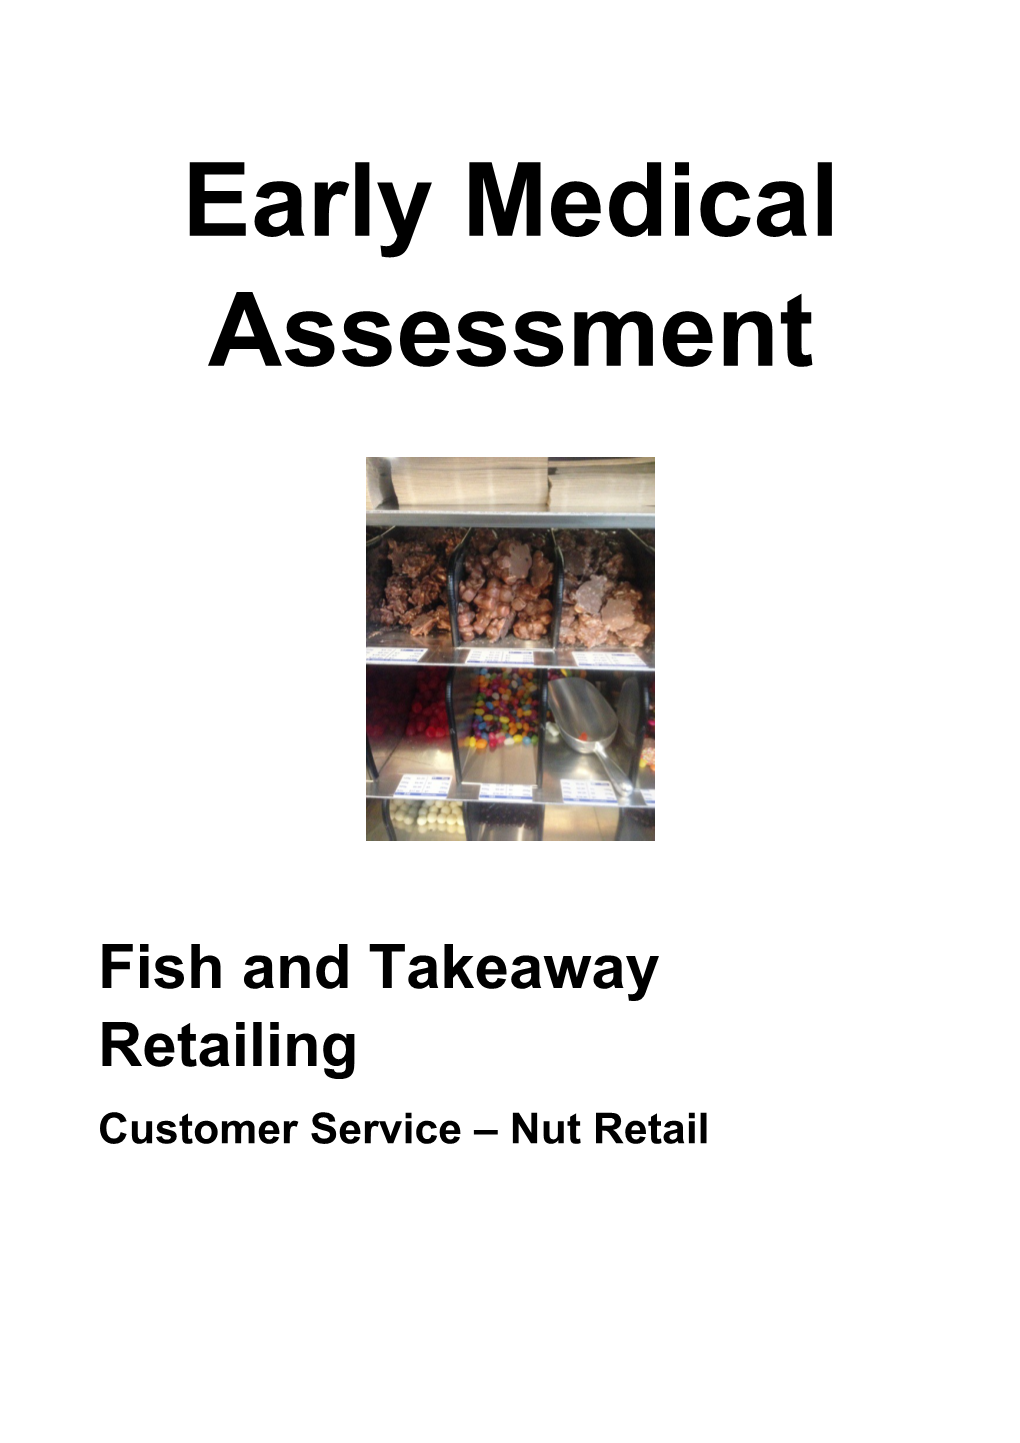 Fish and Takeaway Retailing - Customer Service 2